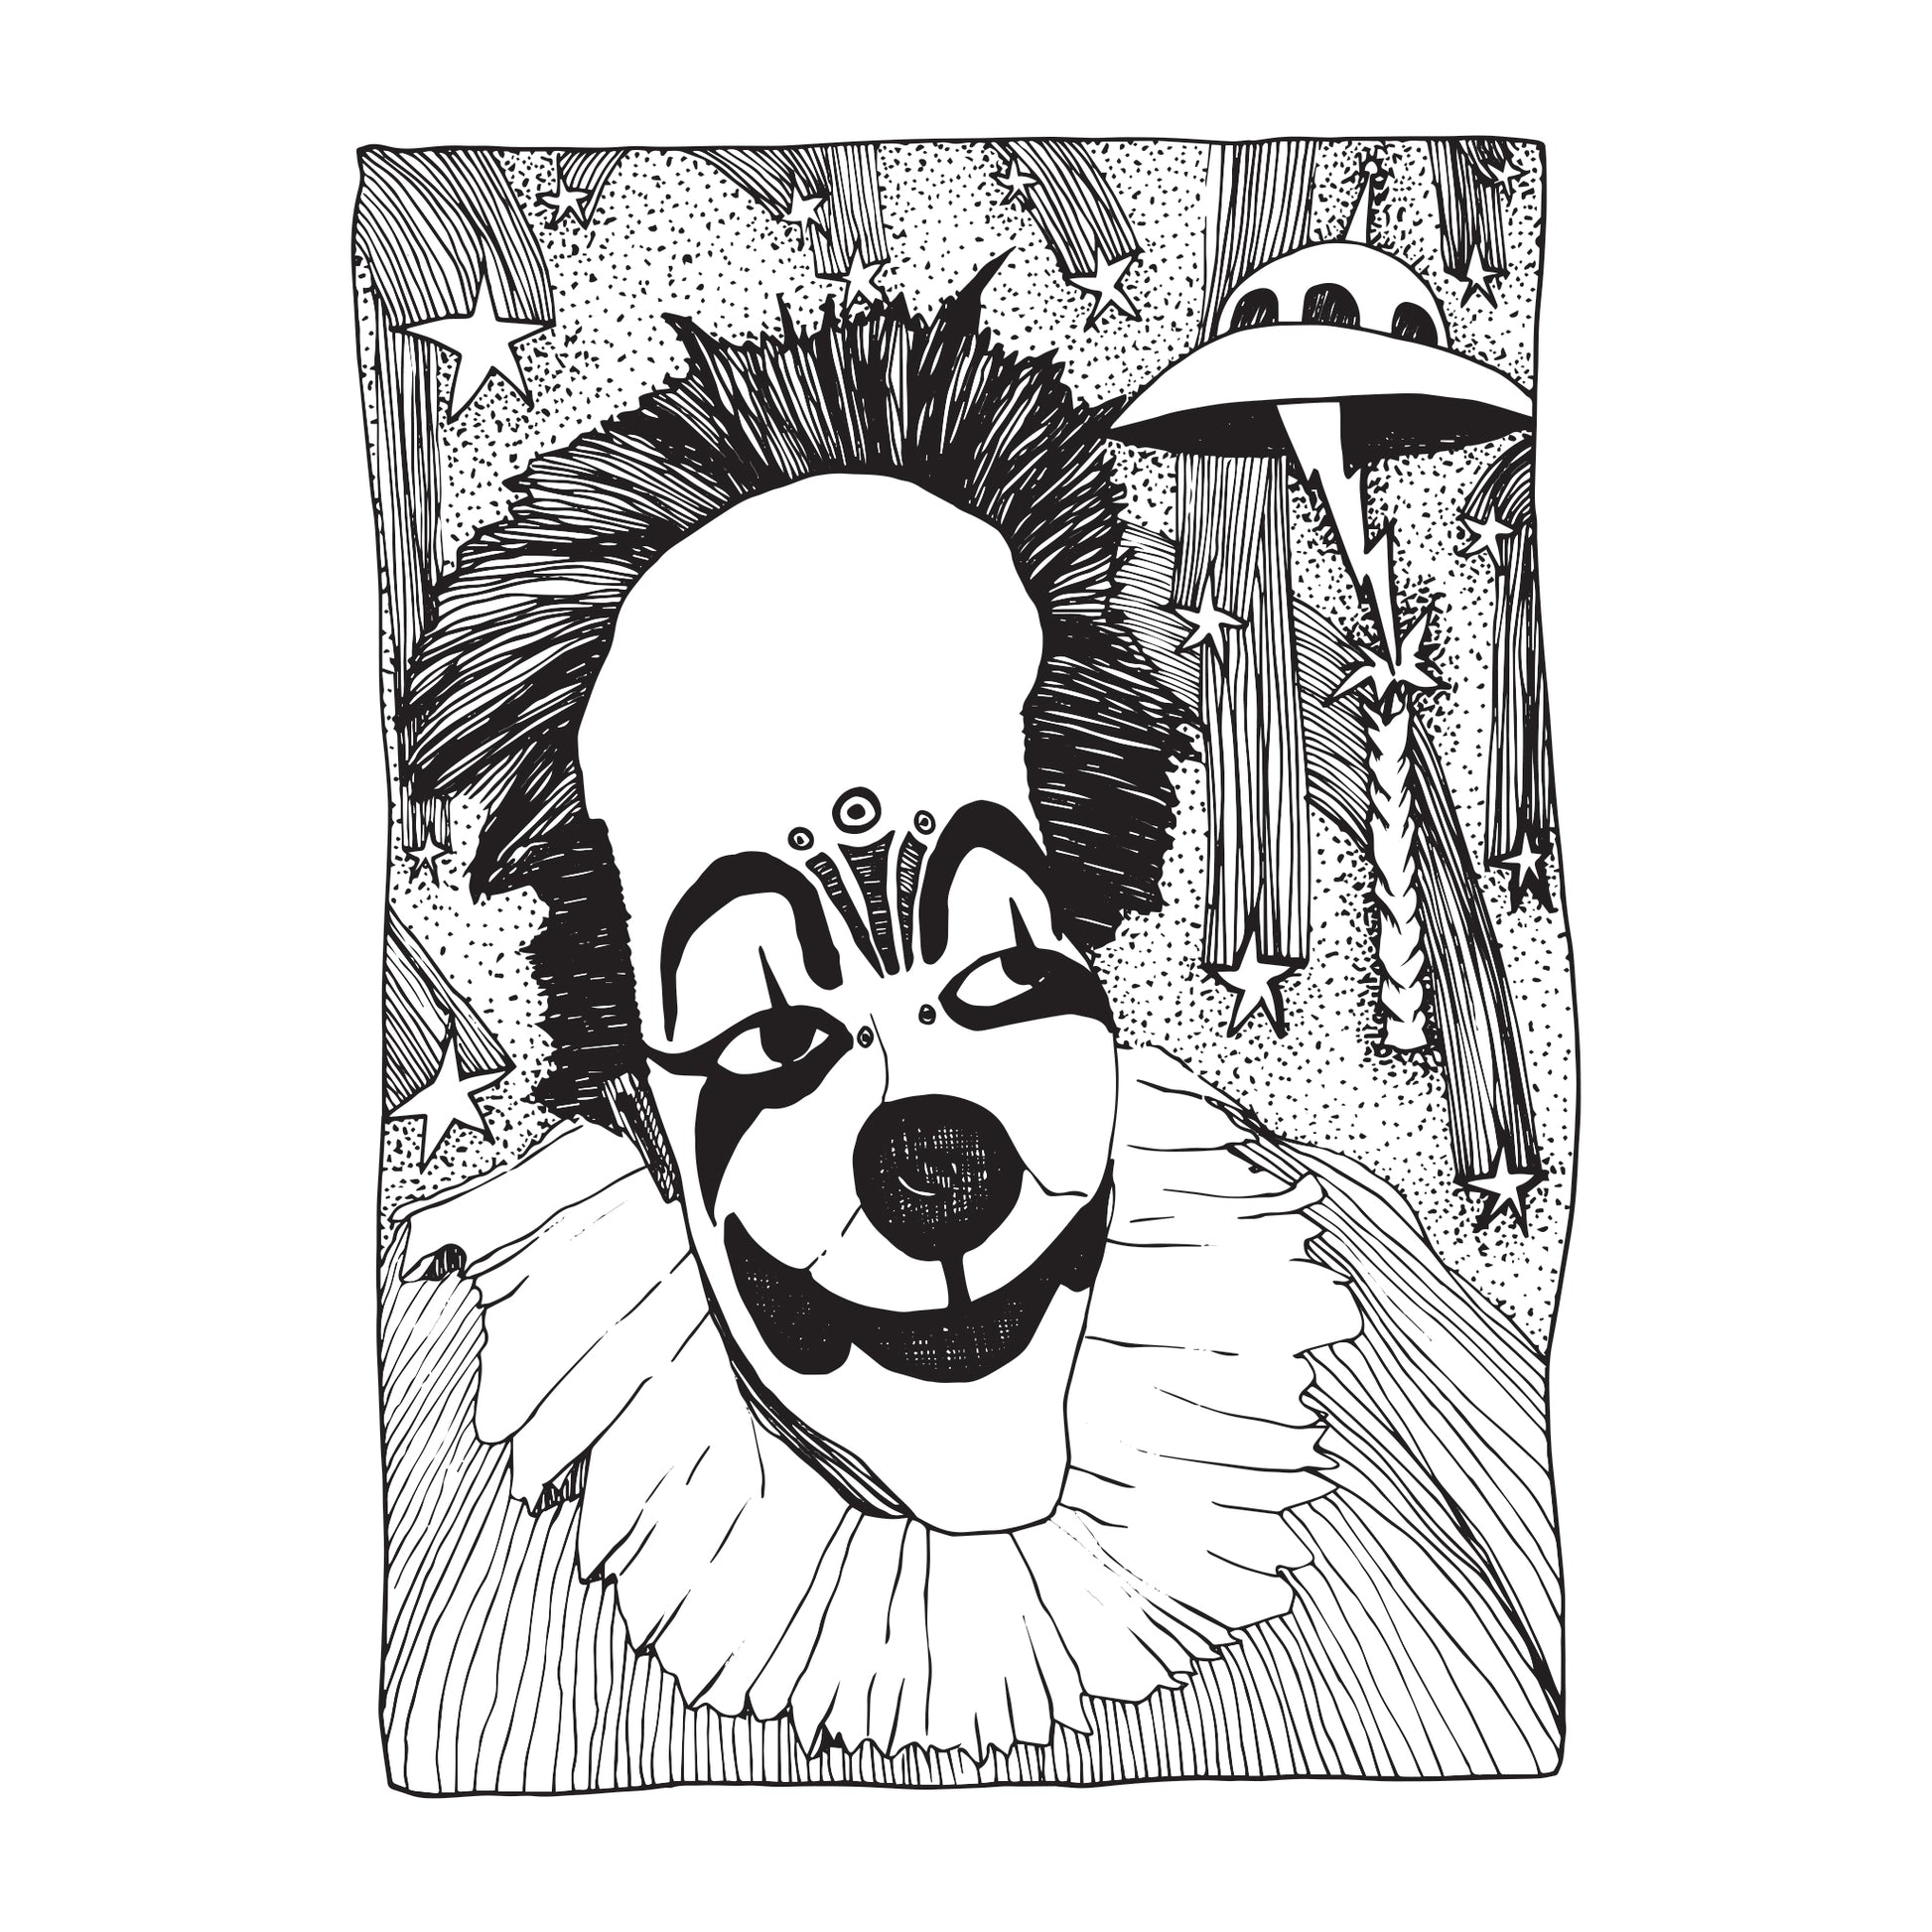 black and white illustration of a clown , on a night with shooting stars everywhere, watching with a small grin as a spaceship lights a candle floating infront of them